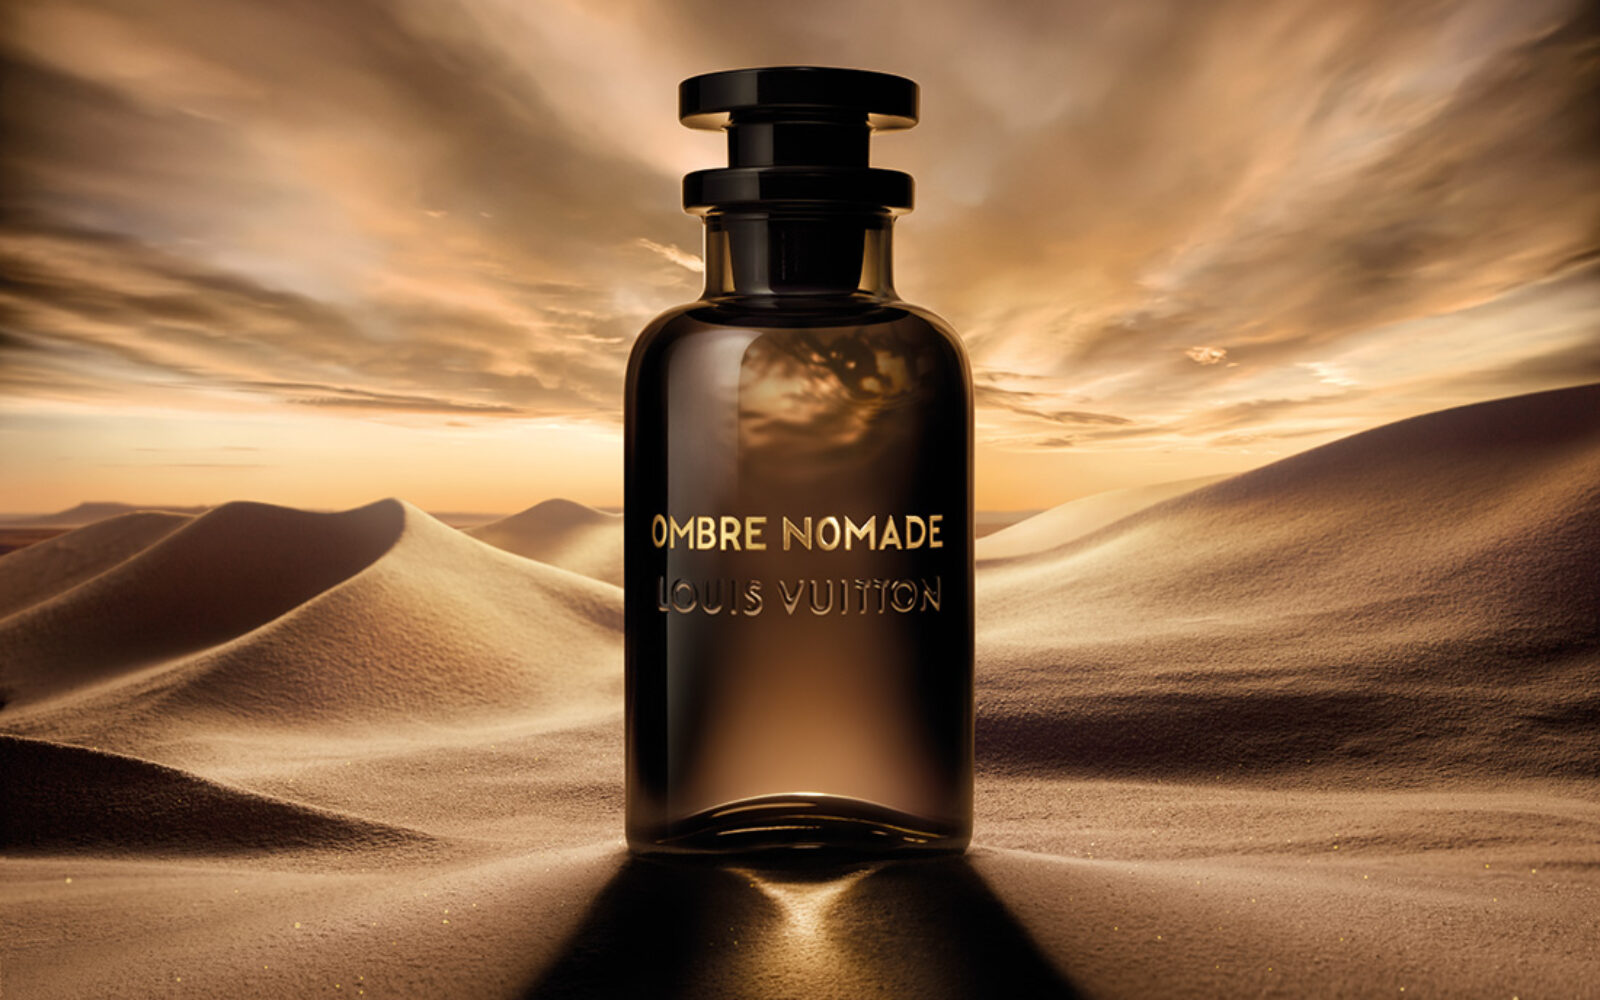 Louis Vuitton Creates Its First Unisex Perfume Collection